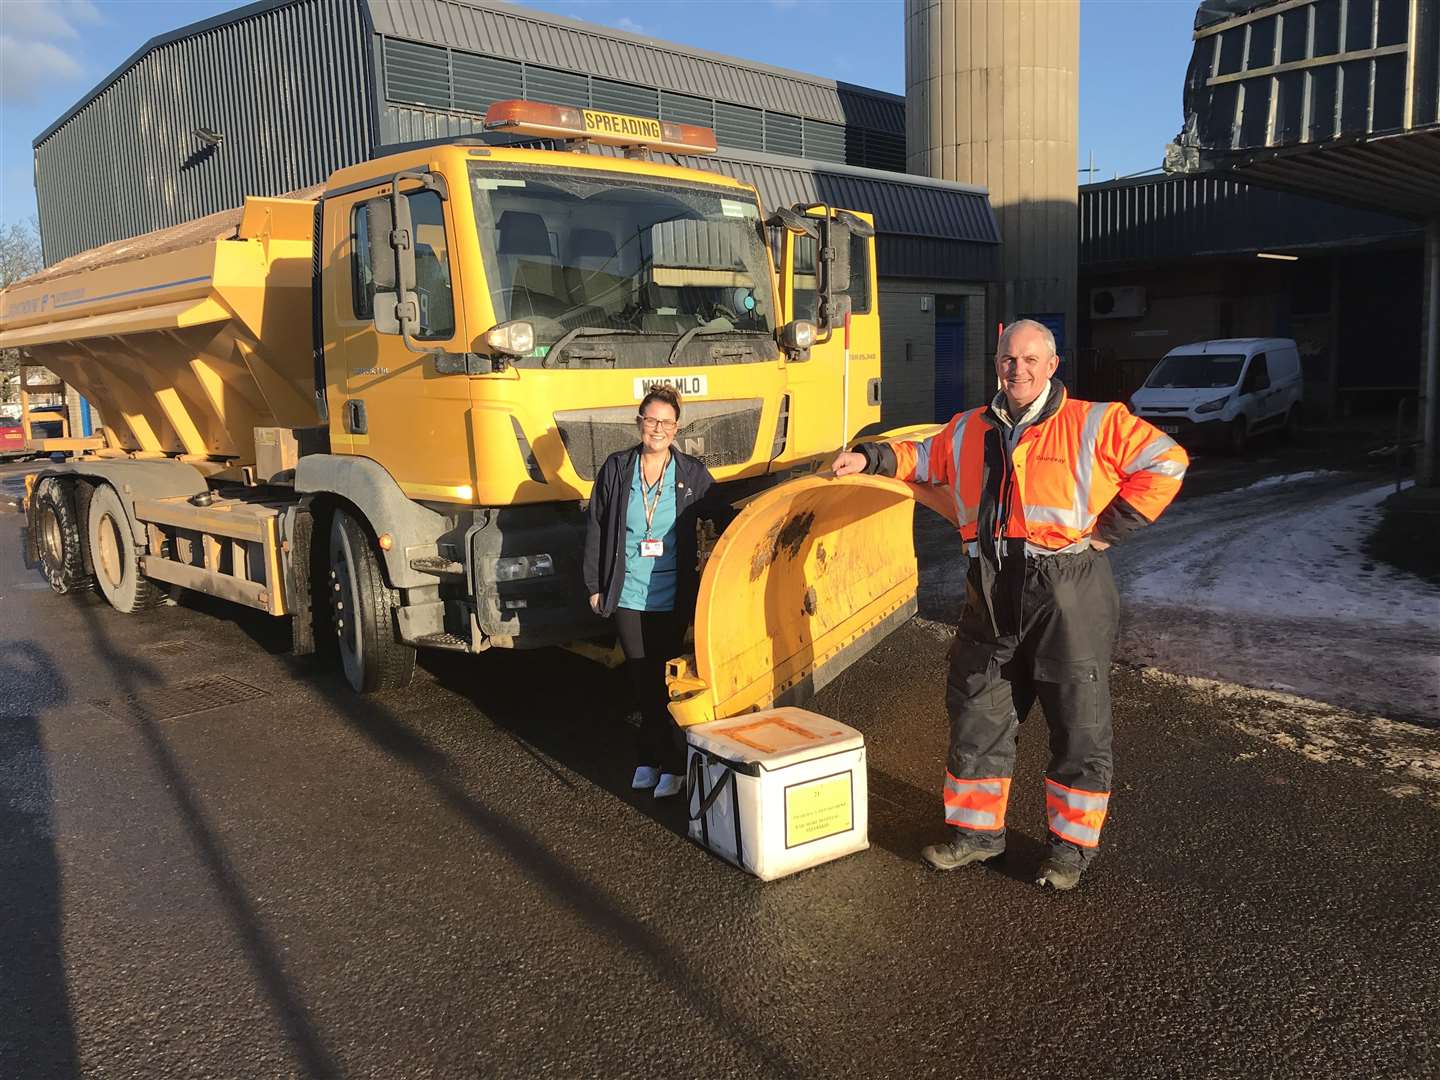 Peter Swanson, civil infrastructure manager at Dounreay, delivering the vaccines using the site’s snowplough.